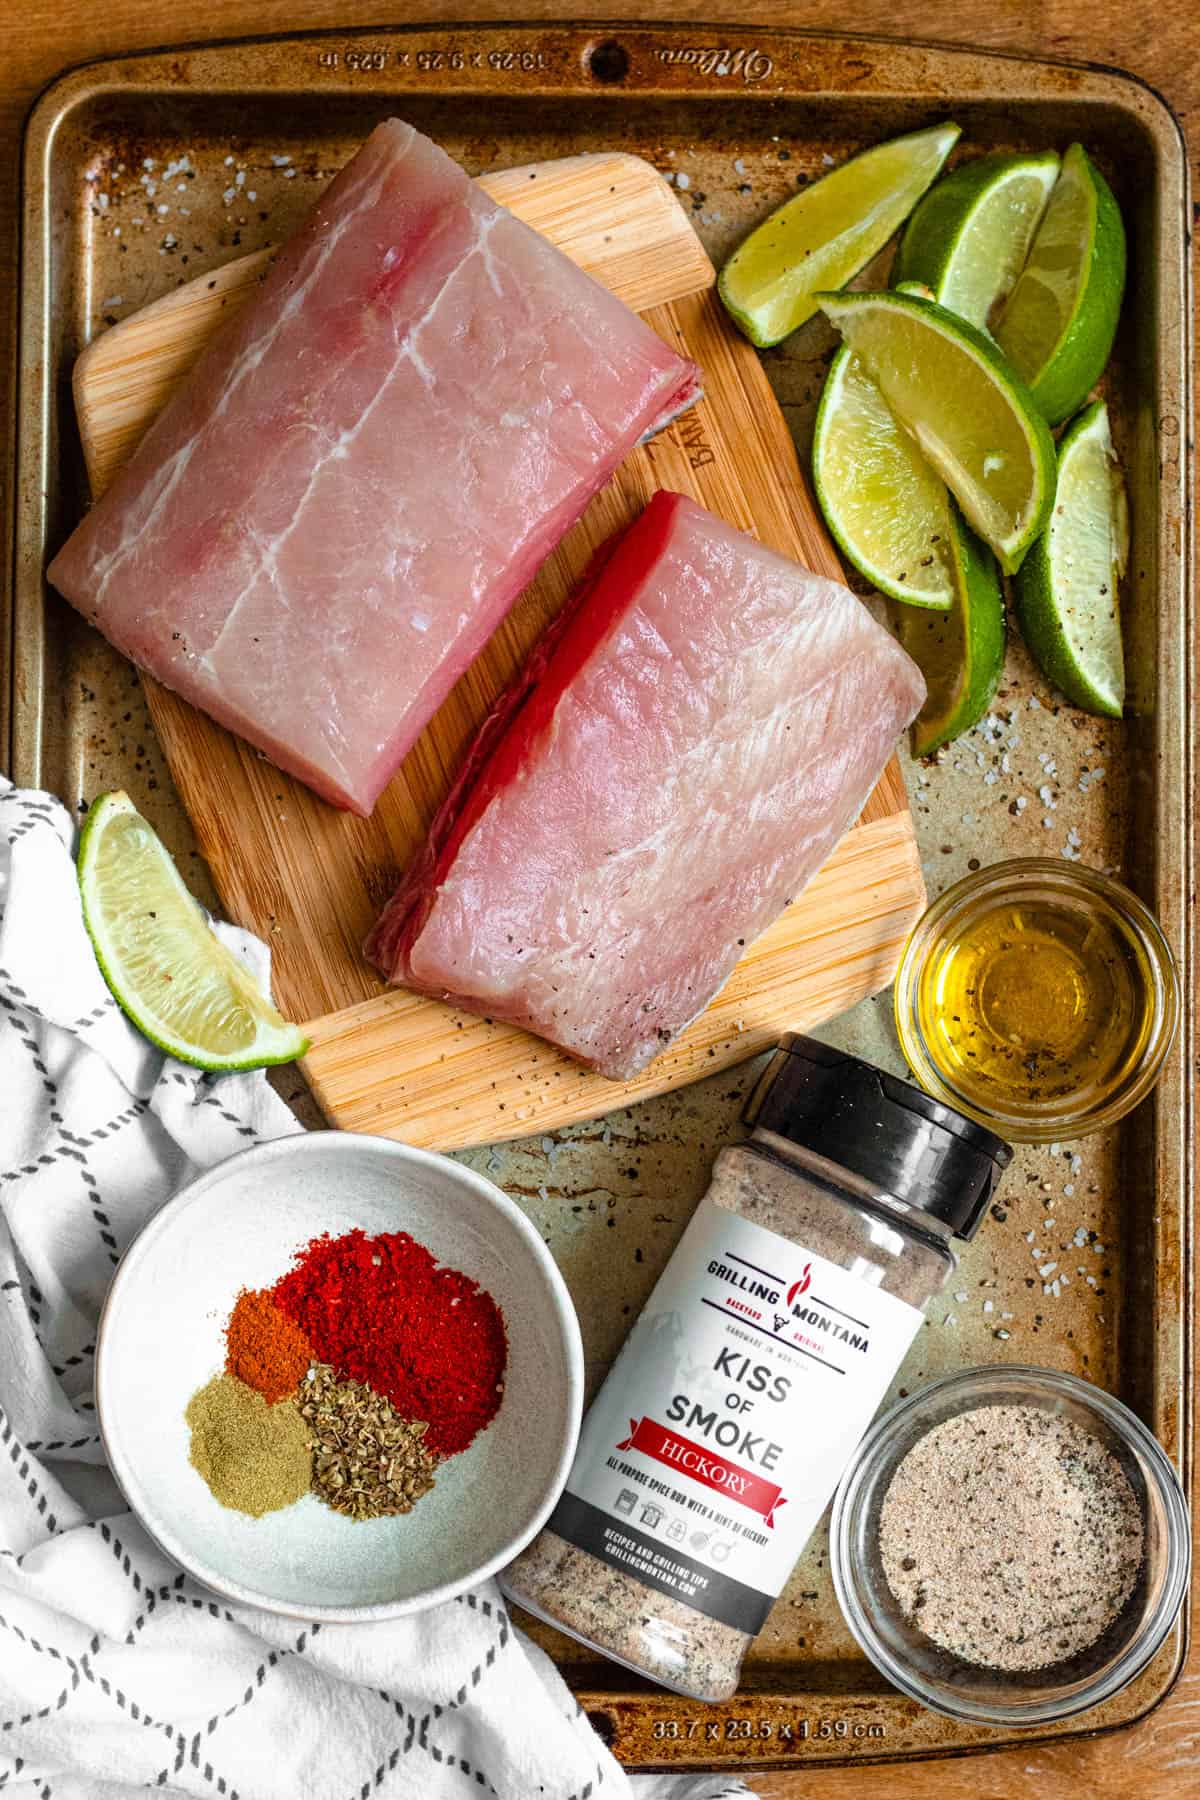 ingredients for blackened mahi mahi on a cutting board with limes, seasoning, olive oil, and a bottle of kiss of smoke.